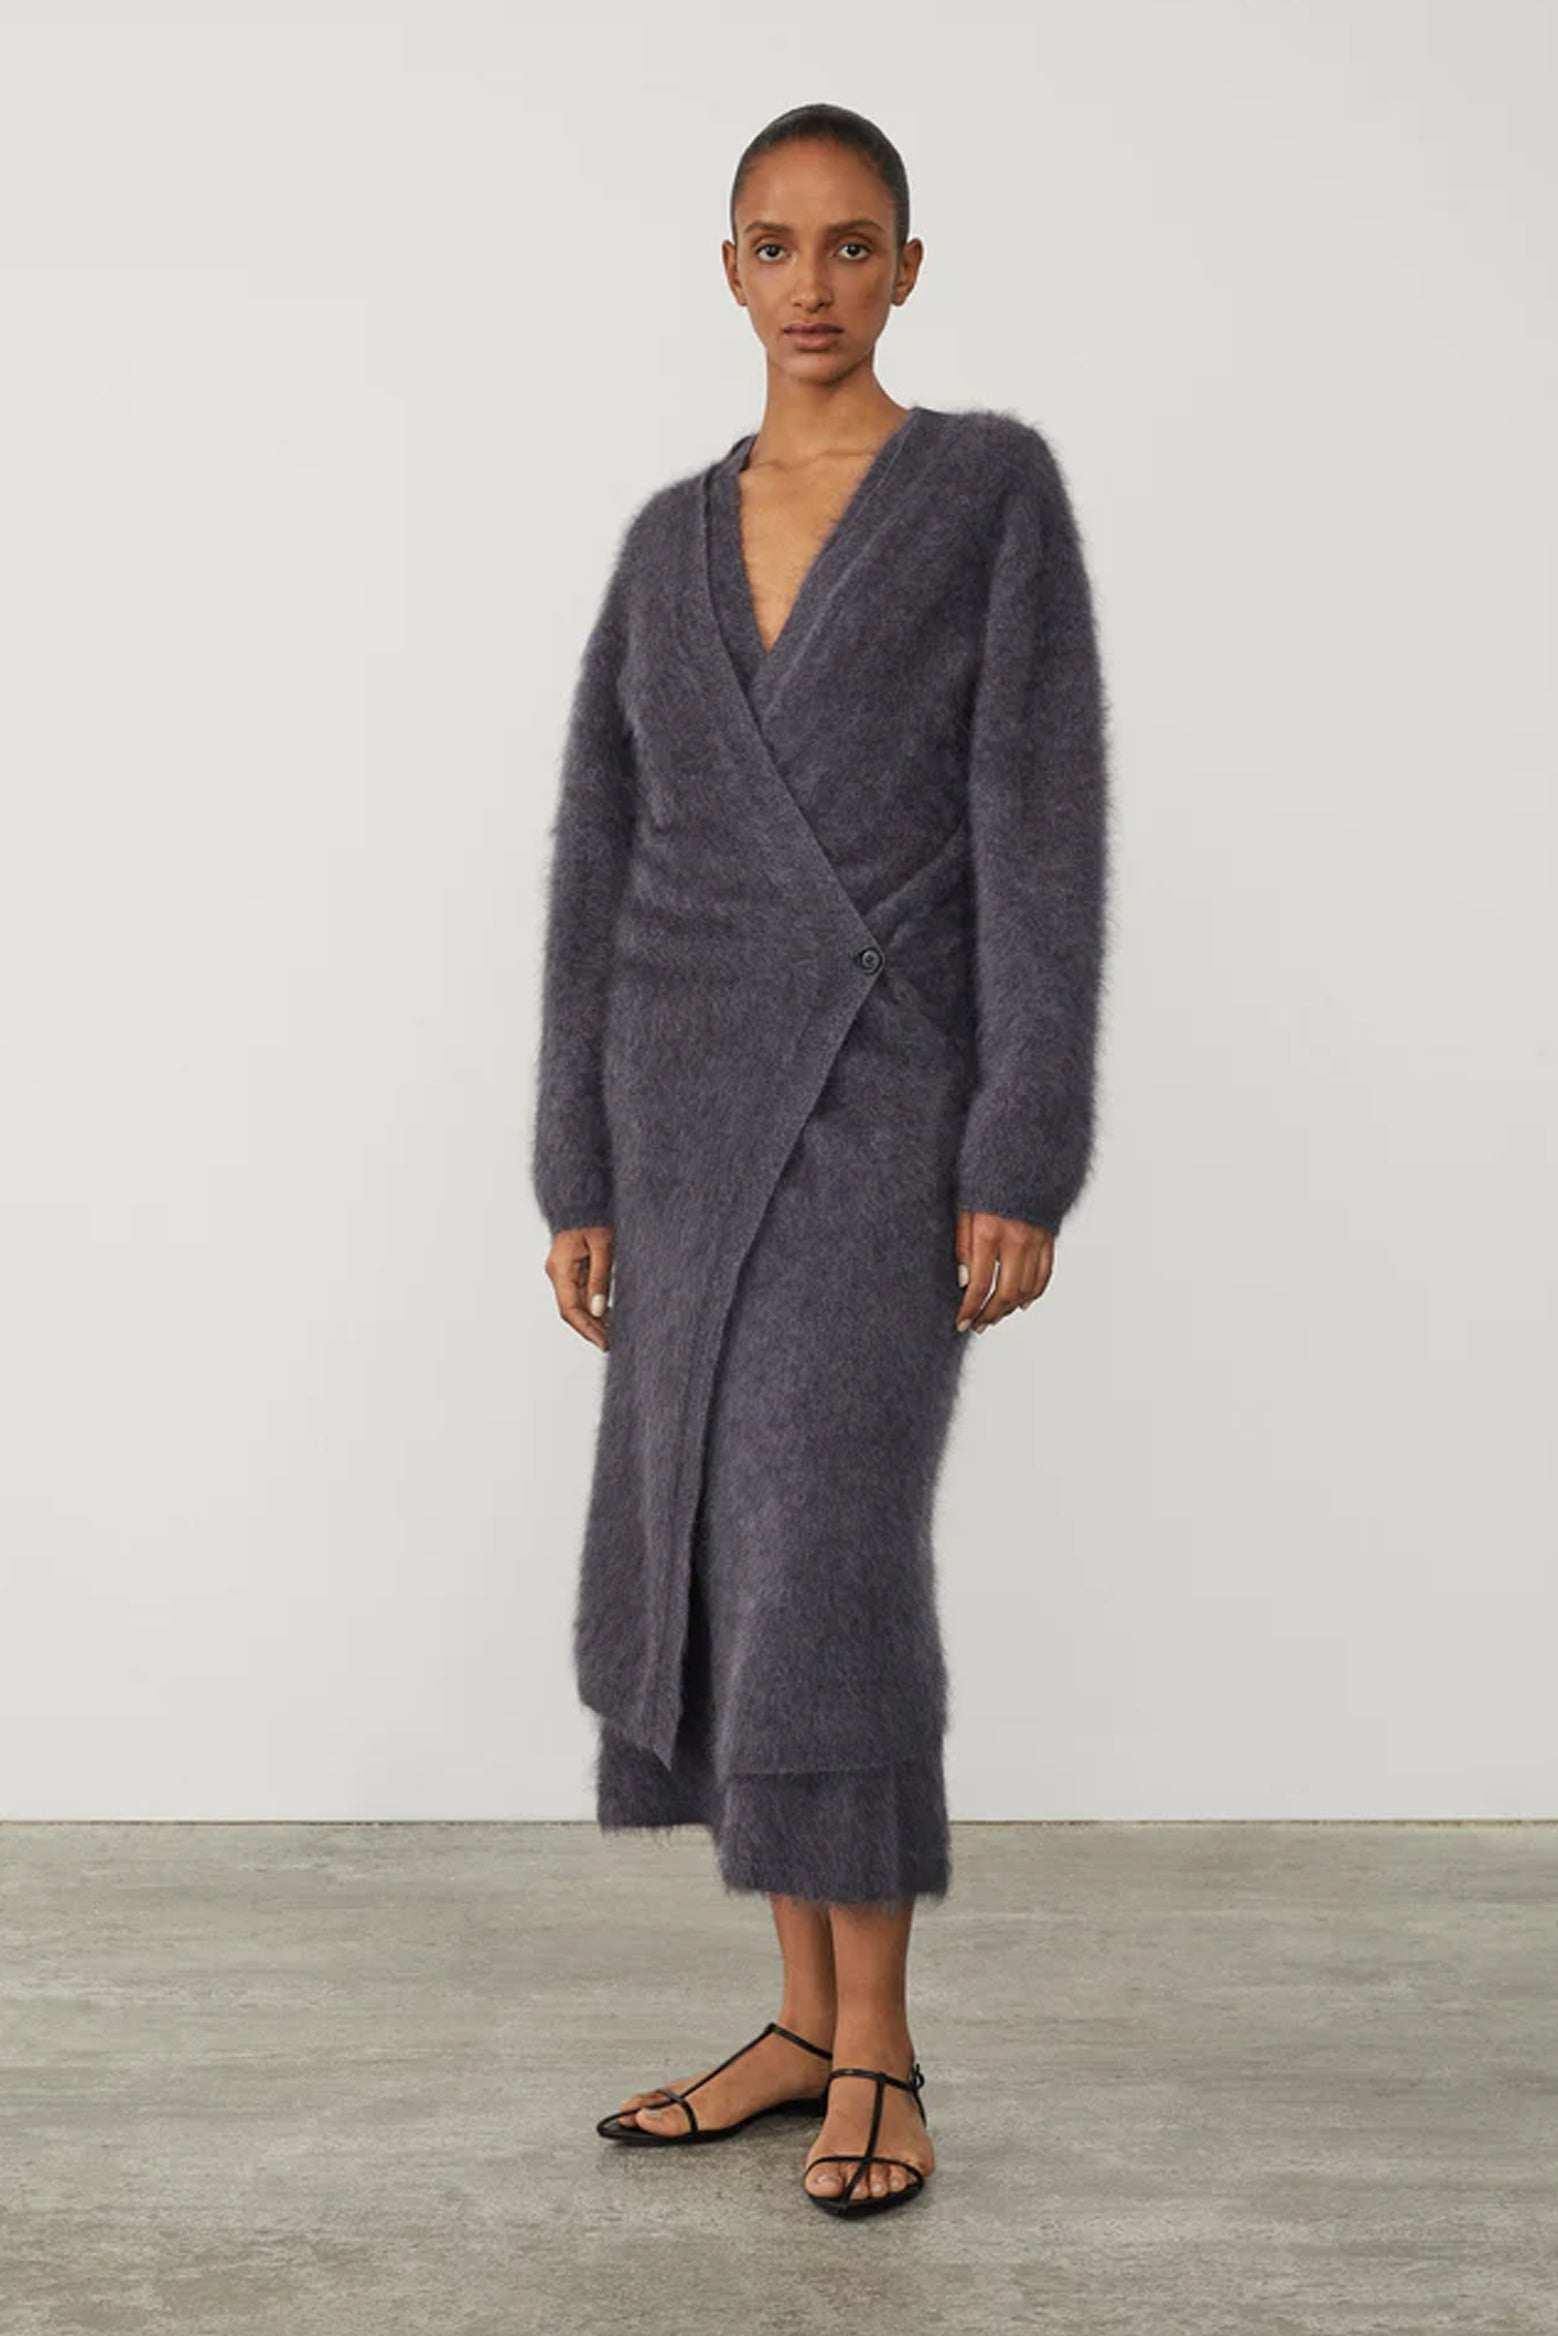 Lisa Yang Agda Cardigan Coat in Graphite available at The New Trend Australia.